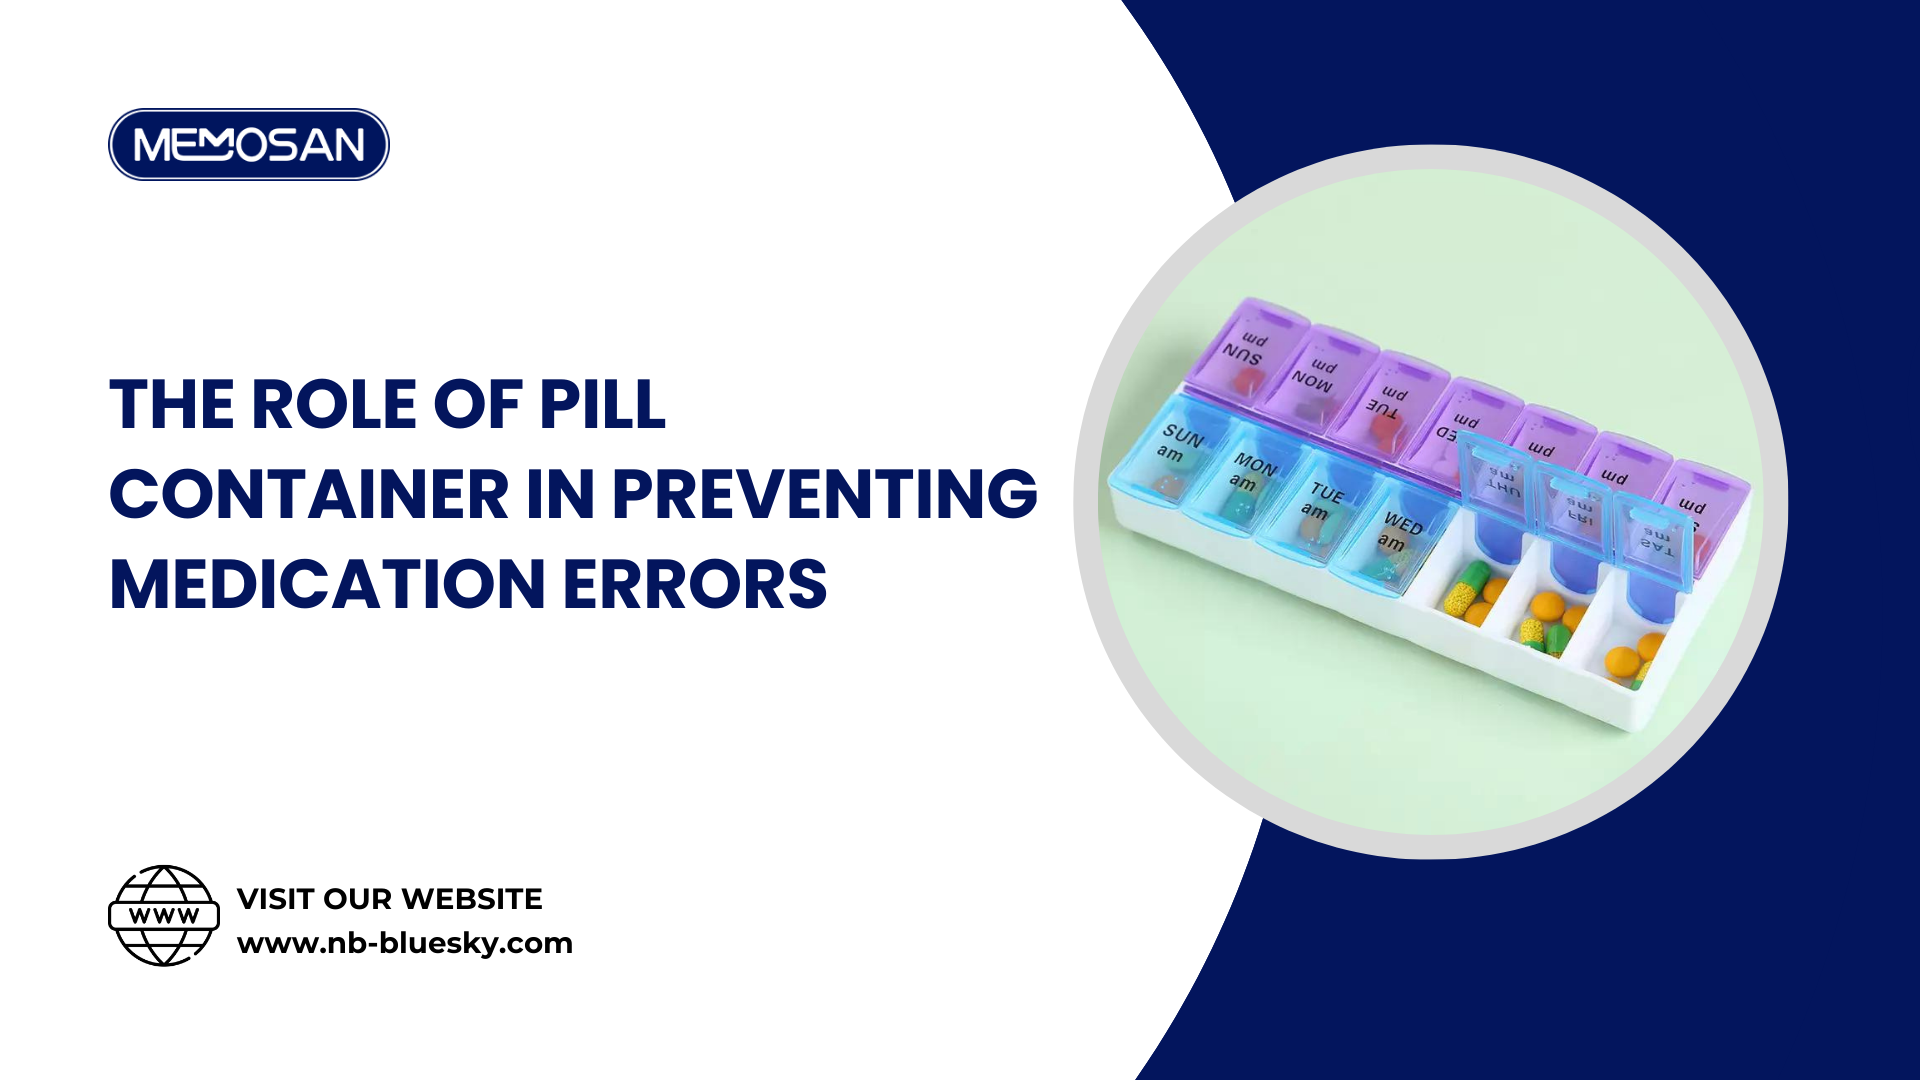 The Role of Pill Container in Preventing Medication Errors